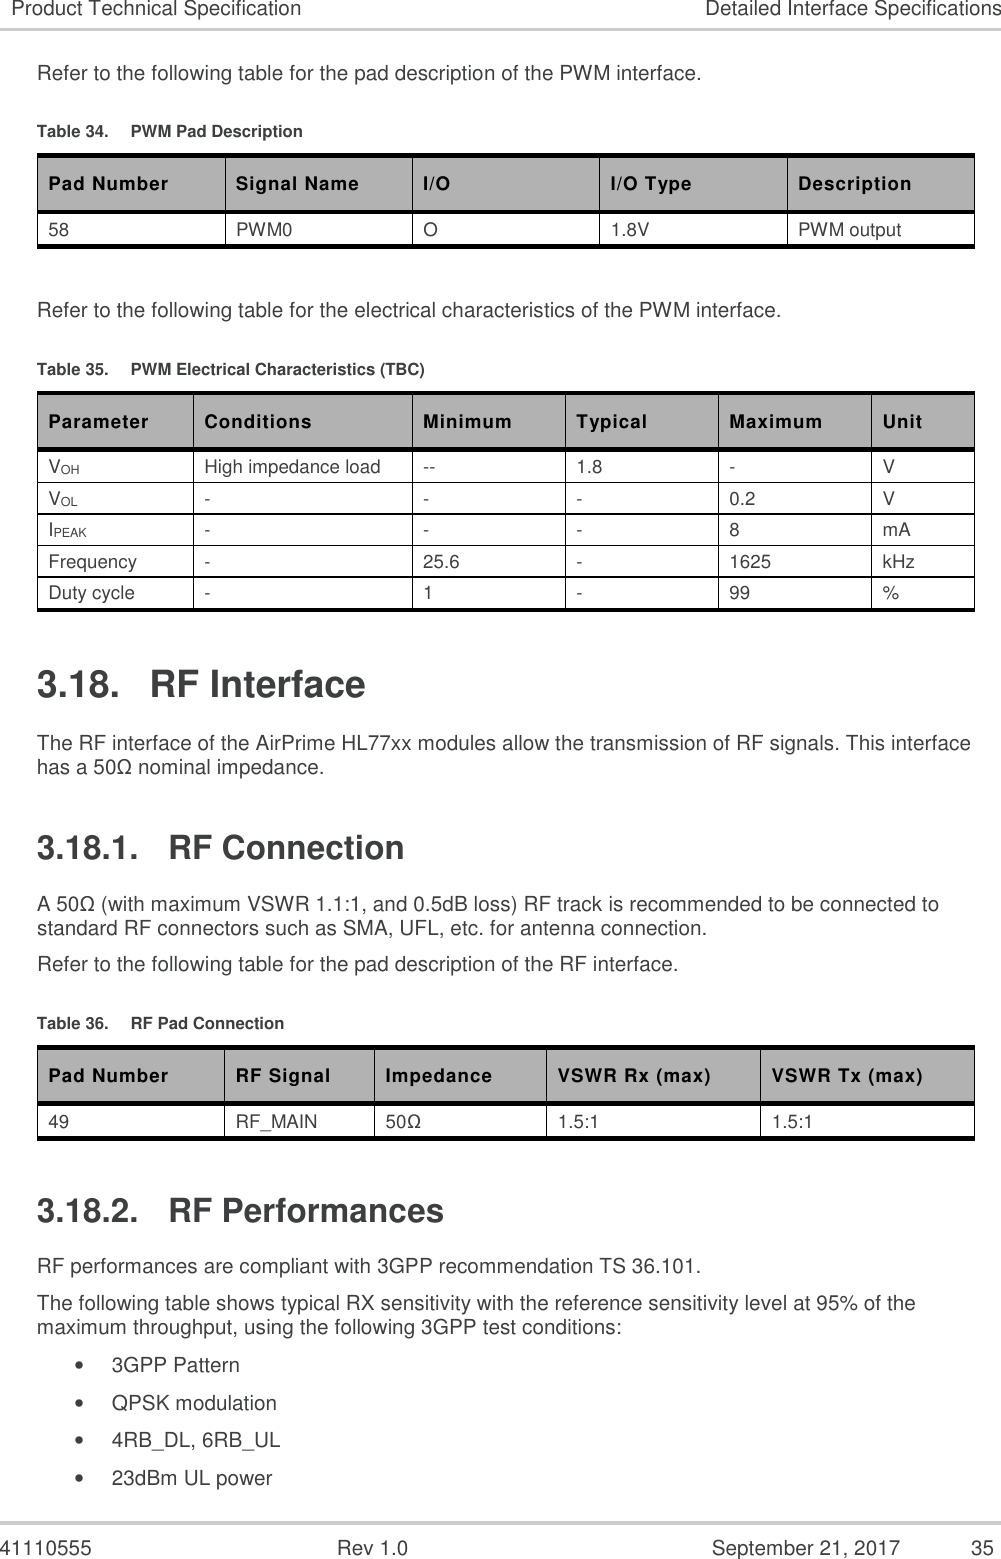   41110555  Rev 1.0  September 21, 2017  35 Product Technical Specification  Detailed Interface Specifications Refer to the following table for the pad description of the PWM interface. Table 34.  PWM Pad Description Pad Number  Signal Name  I/O  I/O Type  Description 58  PWM0  O  1.8V  PWM output  Refer to the following table for the electrical characteristics of the PWM interface. Table 35.  PWM Electrical Characteristics (TBC) Parameter  Conditions  Minimum  Typical  Maximum  Unit VOH  High impedance load  --  1.8  -  V VOL  -  -  -  0.2  V IPEAK  -  -  -  8  mA Frequency  -  25.6  -  1625  kHz Duty cycle  -  1  -  99  % 3.18.  RF Interface The RF interface of the AirPrime HL77xx modules allow the transmission of RF signals. This interface has a 50Ω nominal impedance. 3.18.1.  RF Connection A 50Ω (with maximum VSWR 1.1:1, and 0.5dB loss) RF track is recommended to be connected to standard RF connectors such as SMA, UFL, etc. for antenna connection. Refer to the following table for the pad description of the RF interface. Table 36.  RF Pad Connection Pad Number  RF Signal  Impedance  VSWR Rx (max)  VSWR Tx (max) 49  RF_MAIN  50Ω  1.5:1  1.5:1 3.18.2.  RF Performances RF performances are compliant with 3GPP recommendation TS 36.101. The following table shows typical RX sensitivity with the reference sensitivity level at 95% of the maximum throughput, using the following 3GPP test conditions: •  3GPP Pattern •  QPSK modulation •  4RB_DL, 6RB_UL •  23dBm UL power 